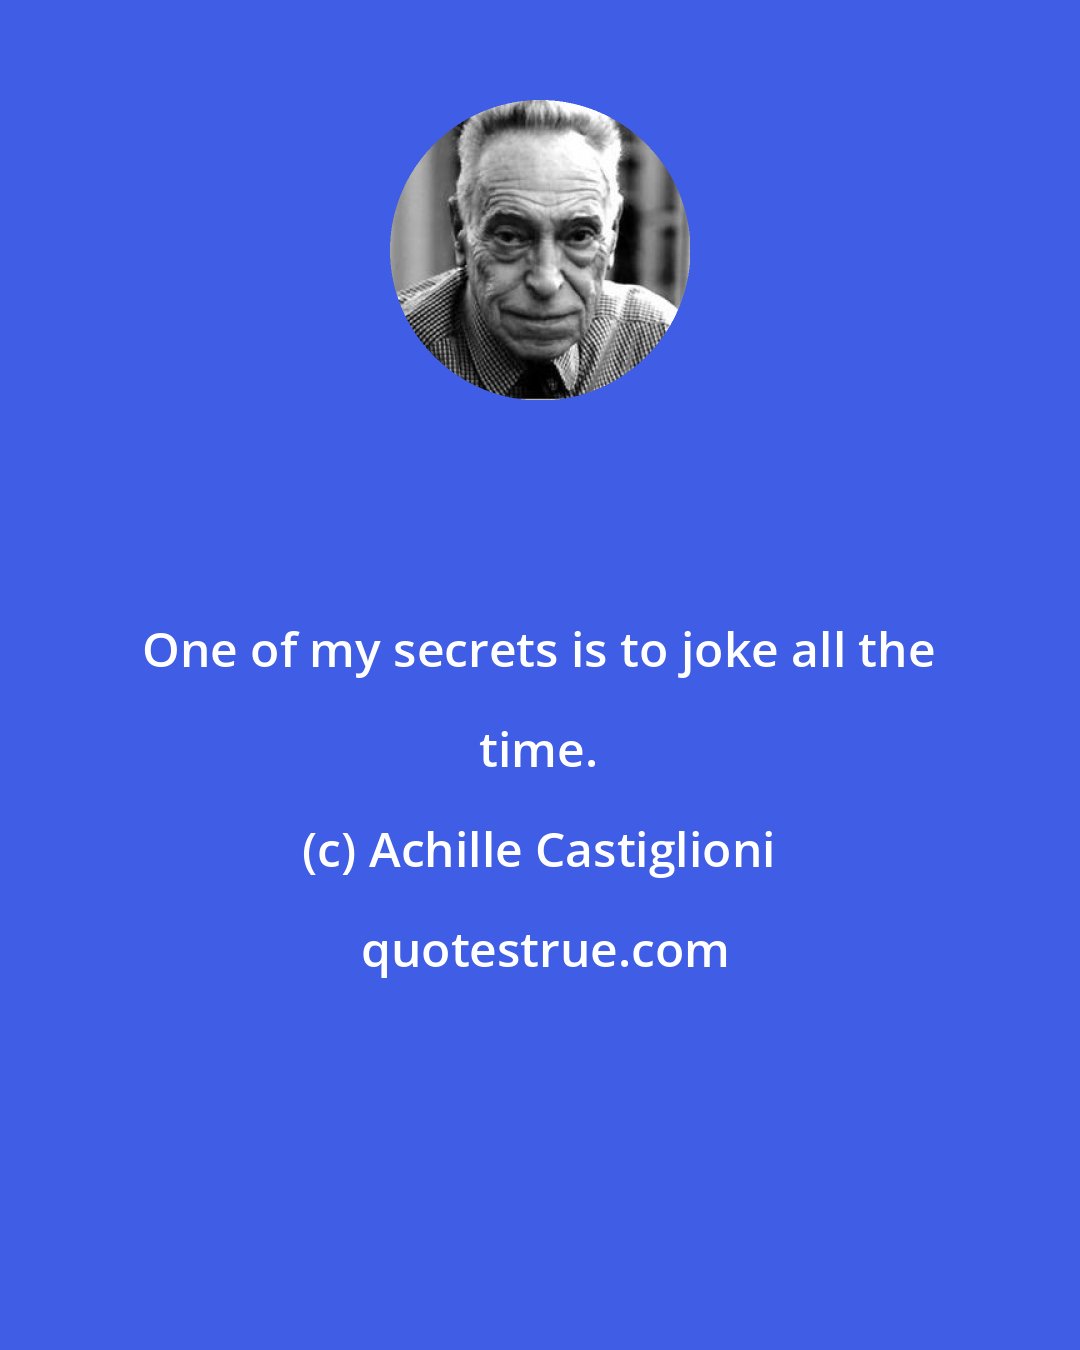 Achille Castiglioni: One of my secrets is to joke all the time.